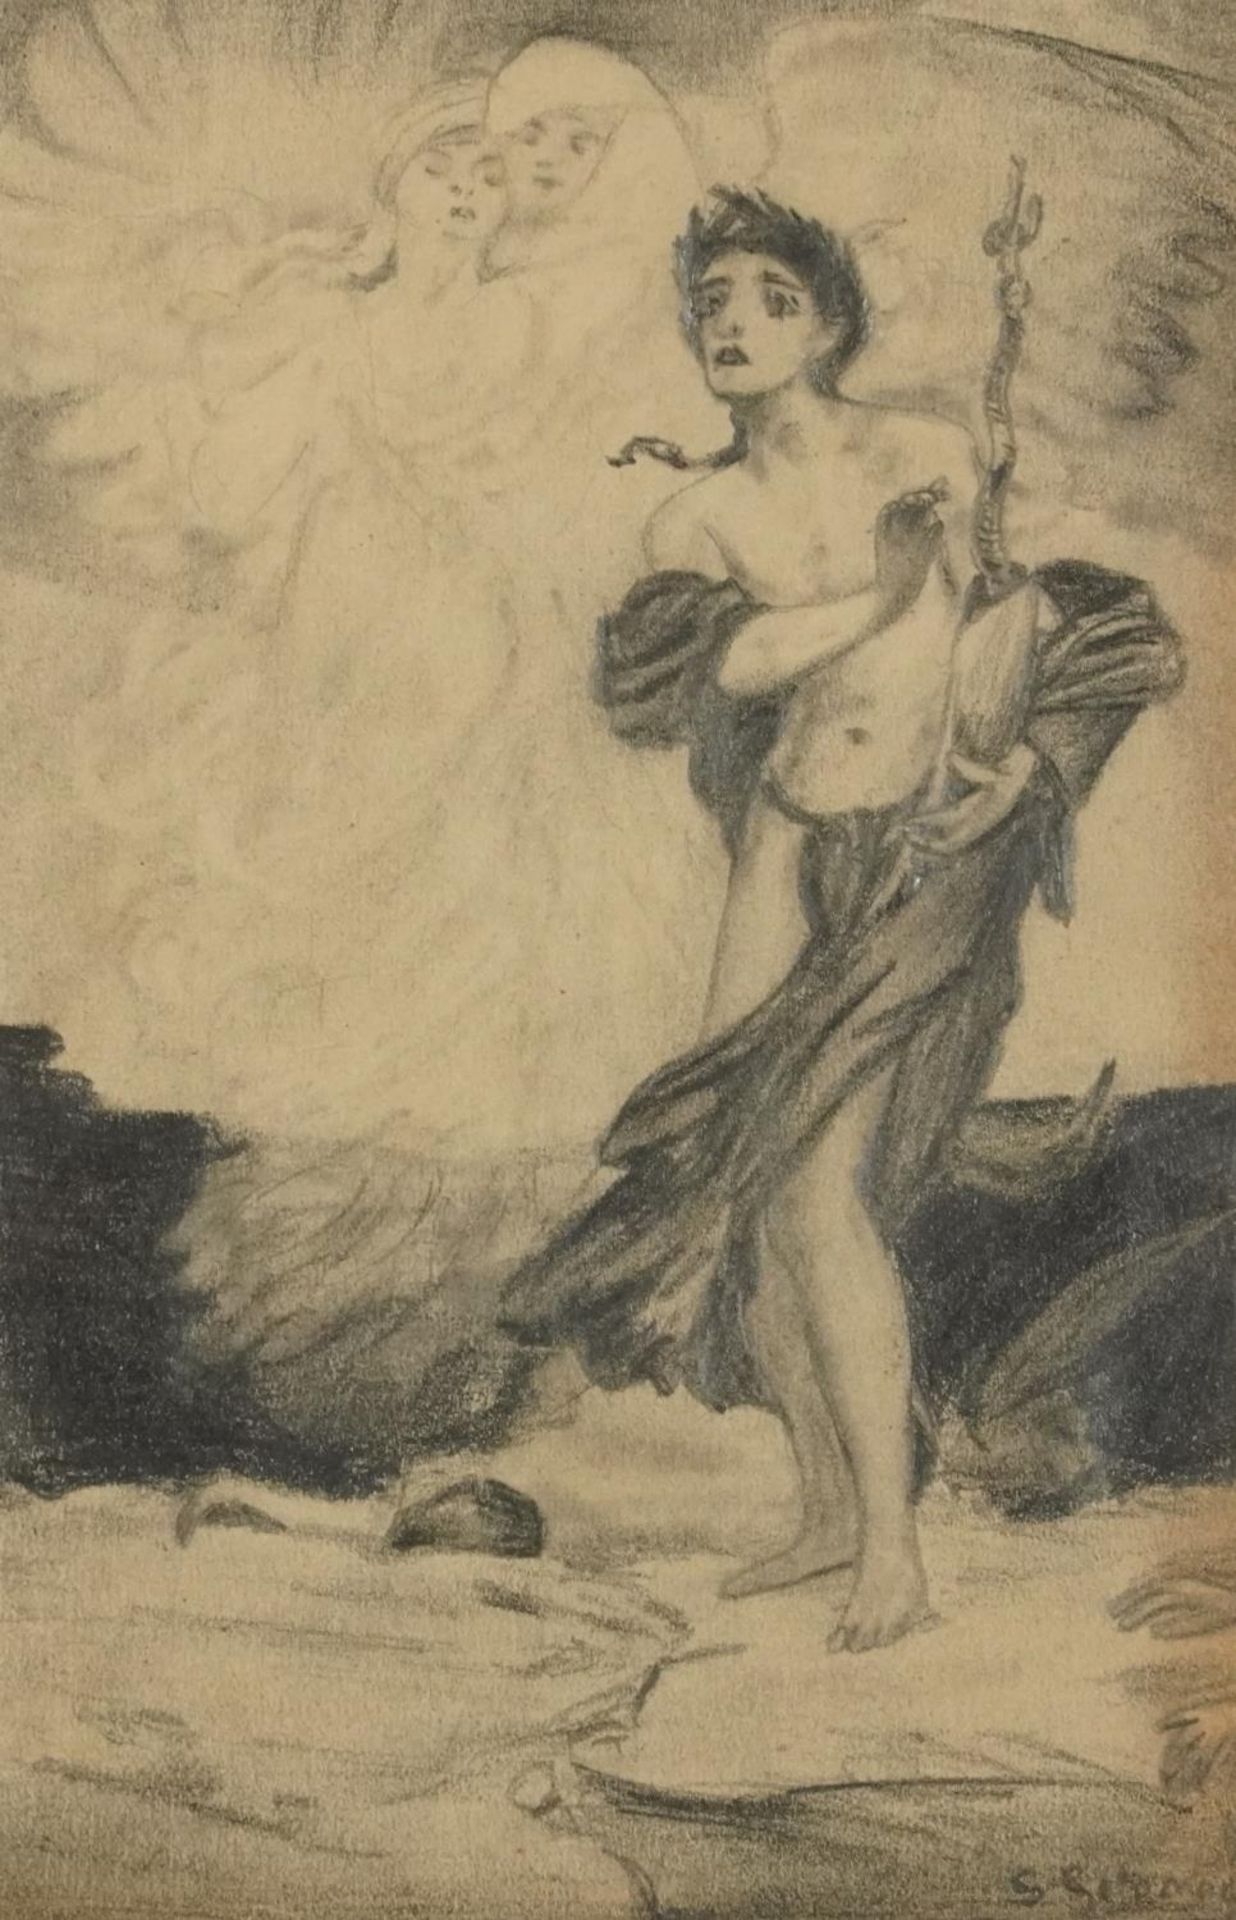 The Rod of Asciepius and Angels, Greek mythology interest pencil drawing, possibly 18th century,